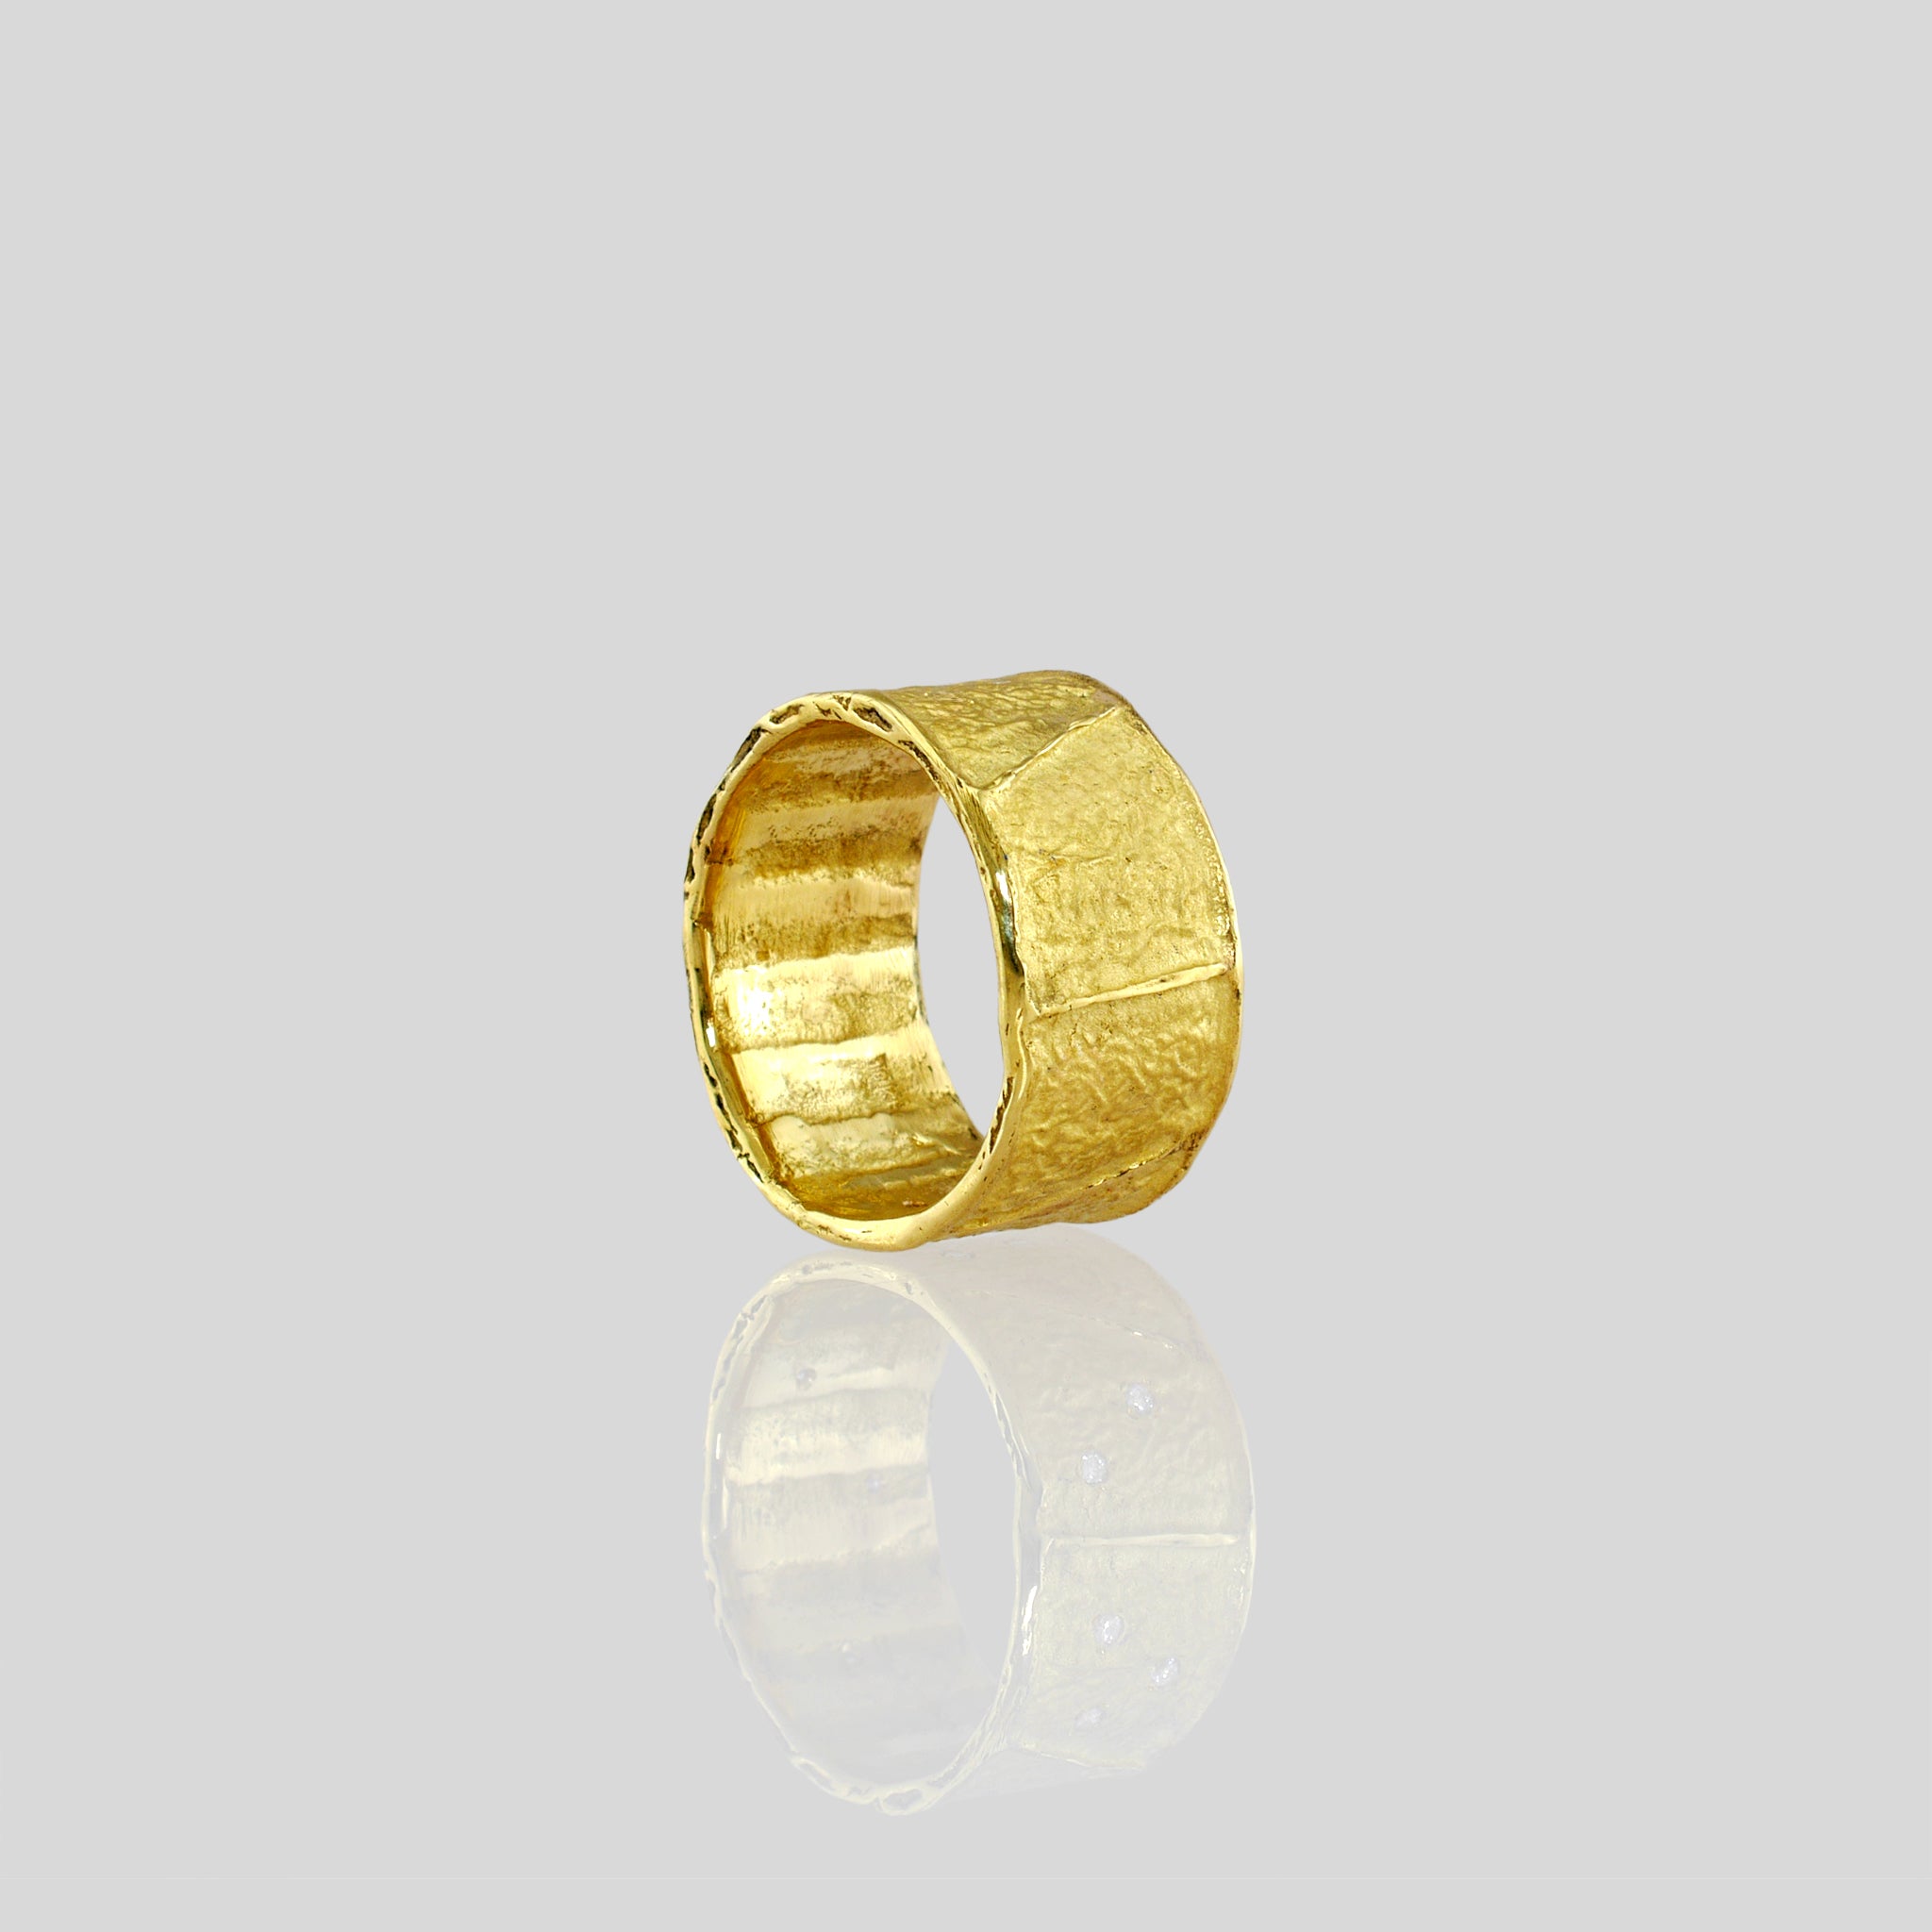 A beautifully crafted 18k Yellow Gold Ring with an innovative wrinkled texture, drawing inspiration from ancient Egyptian elegance, showcased in a sleek and sophisticated style without diamonds.